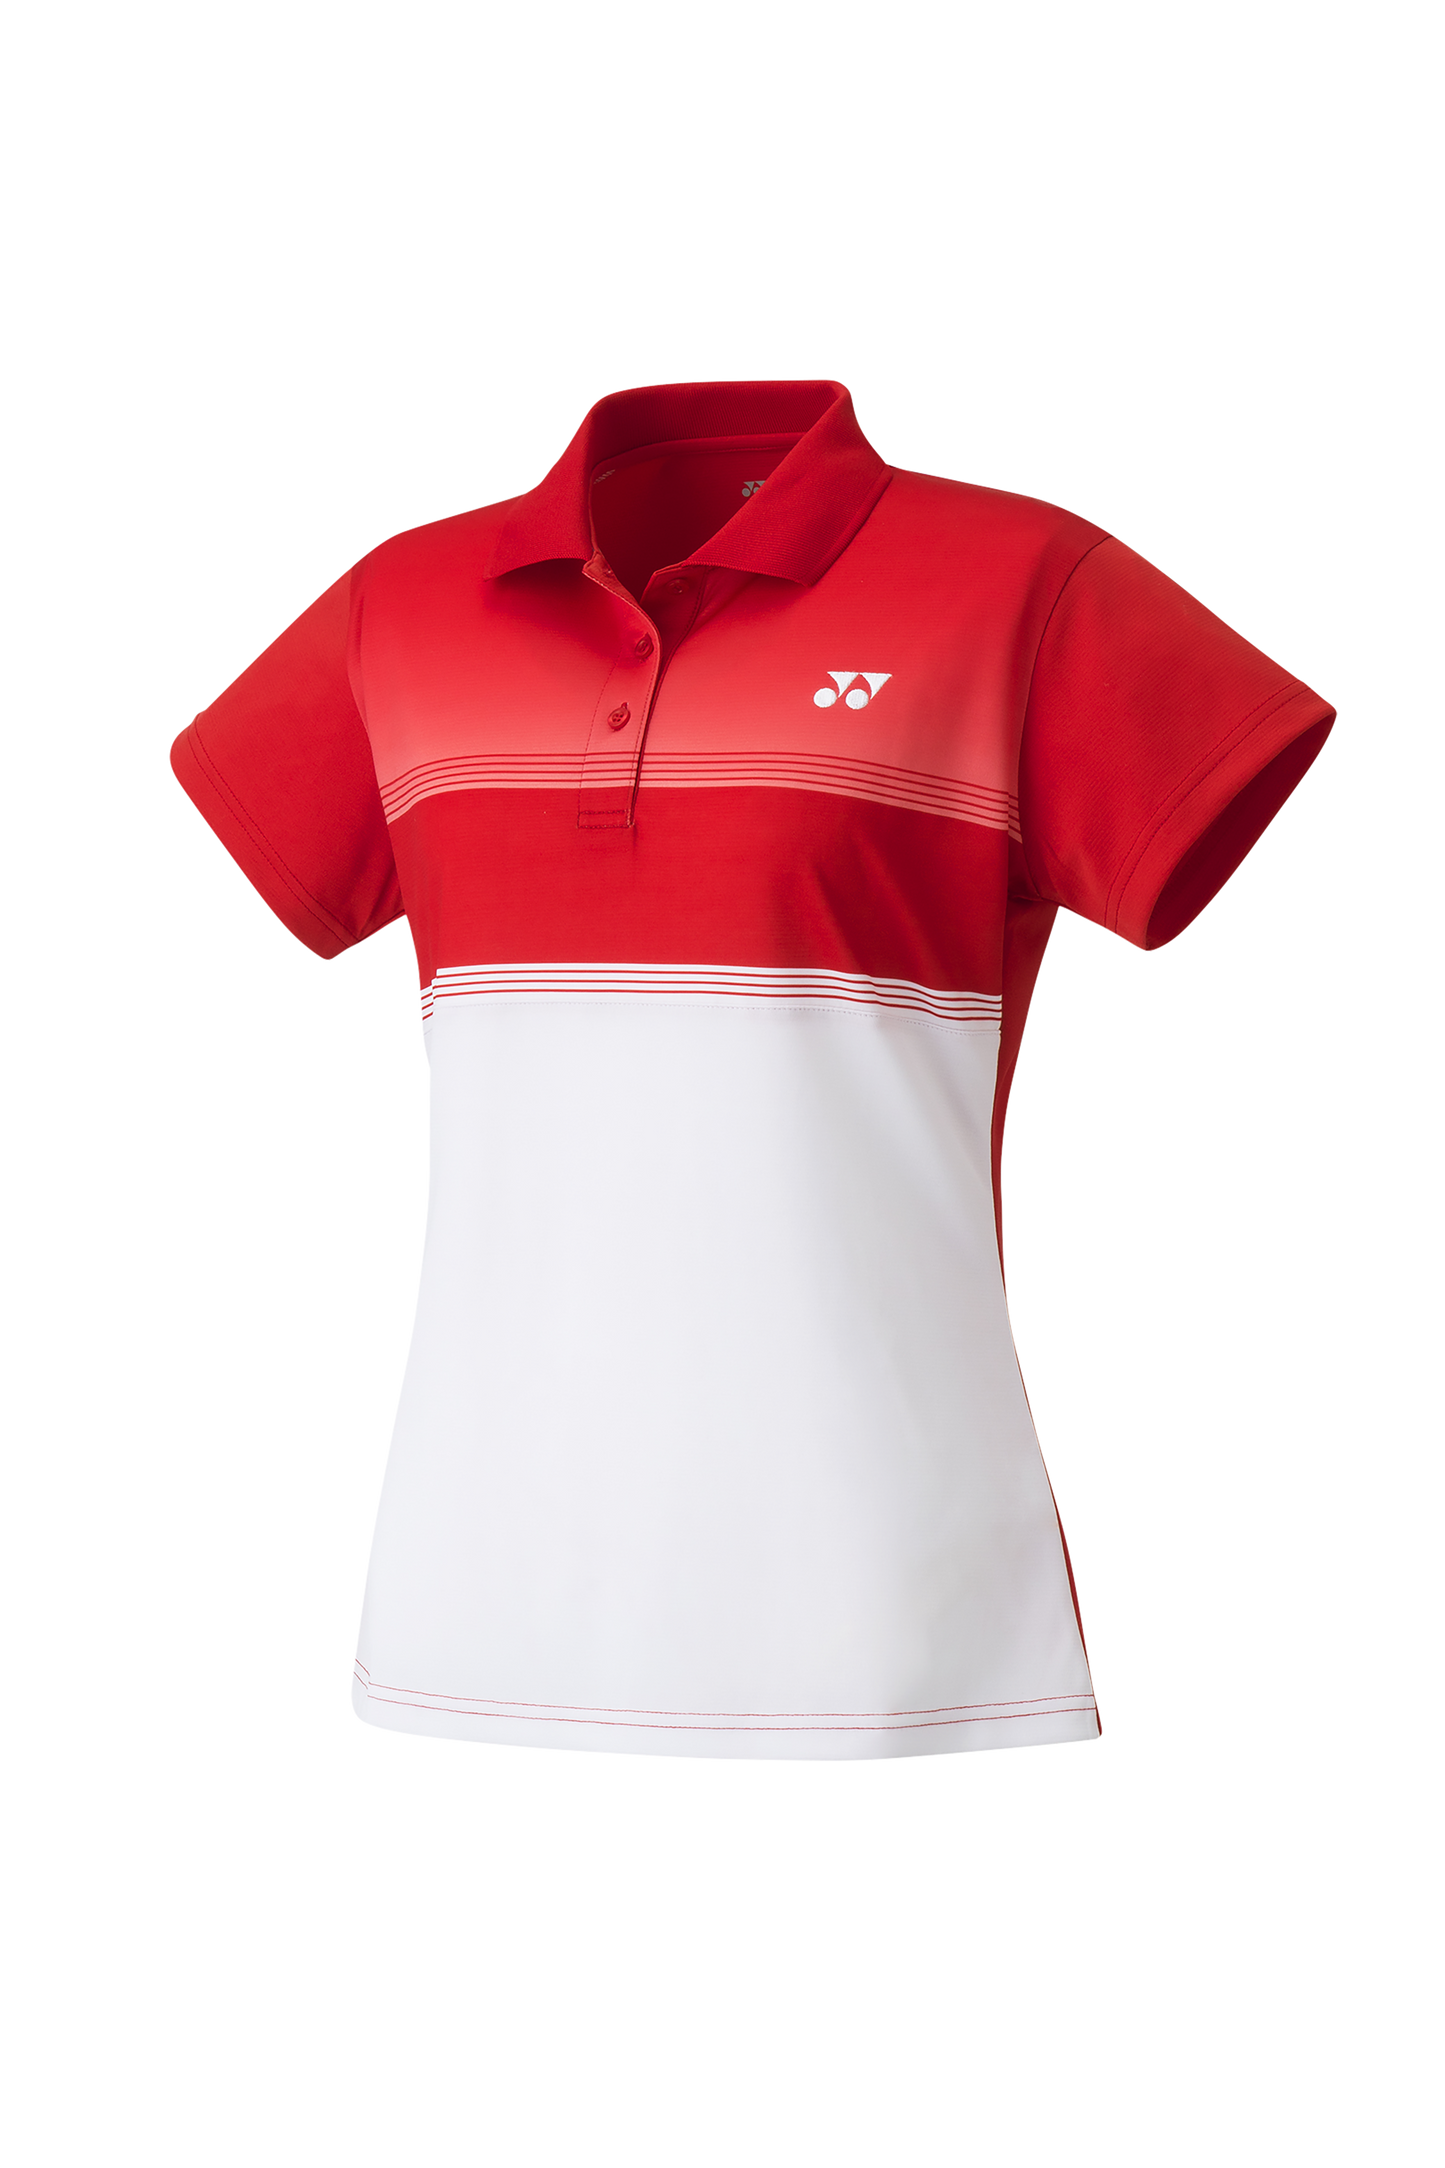 YONEX Lady's Polo Shirt YW0019 [Sunset Red] - Max Sports